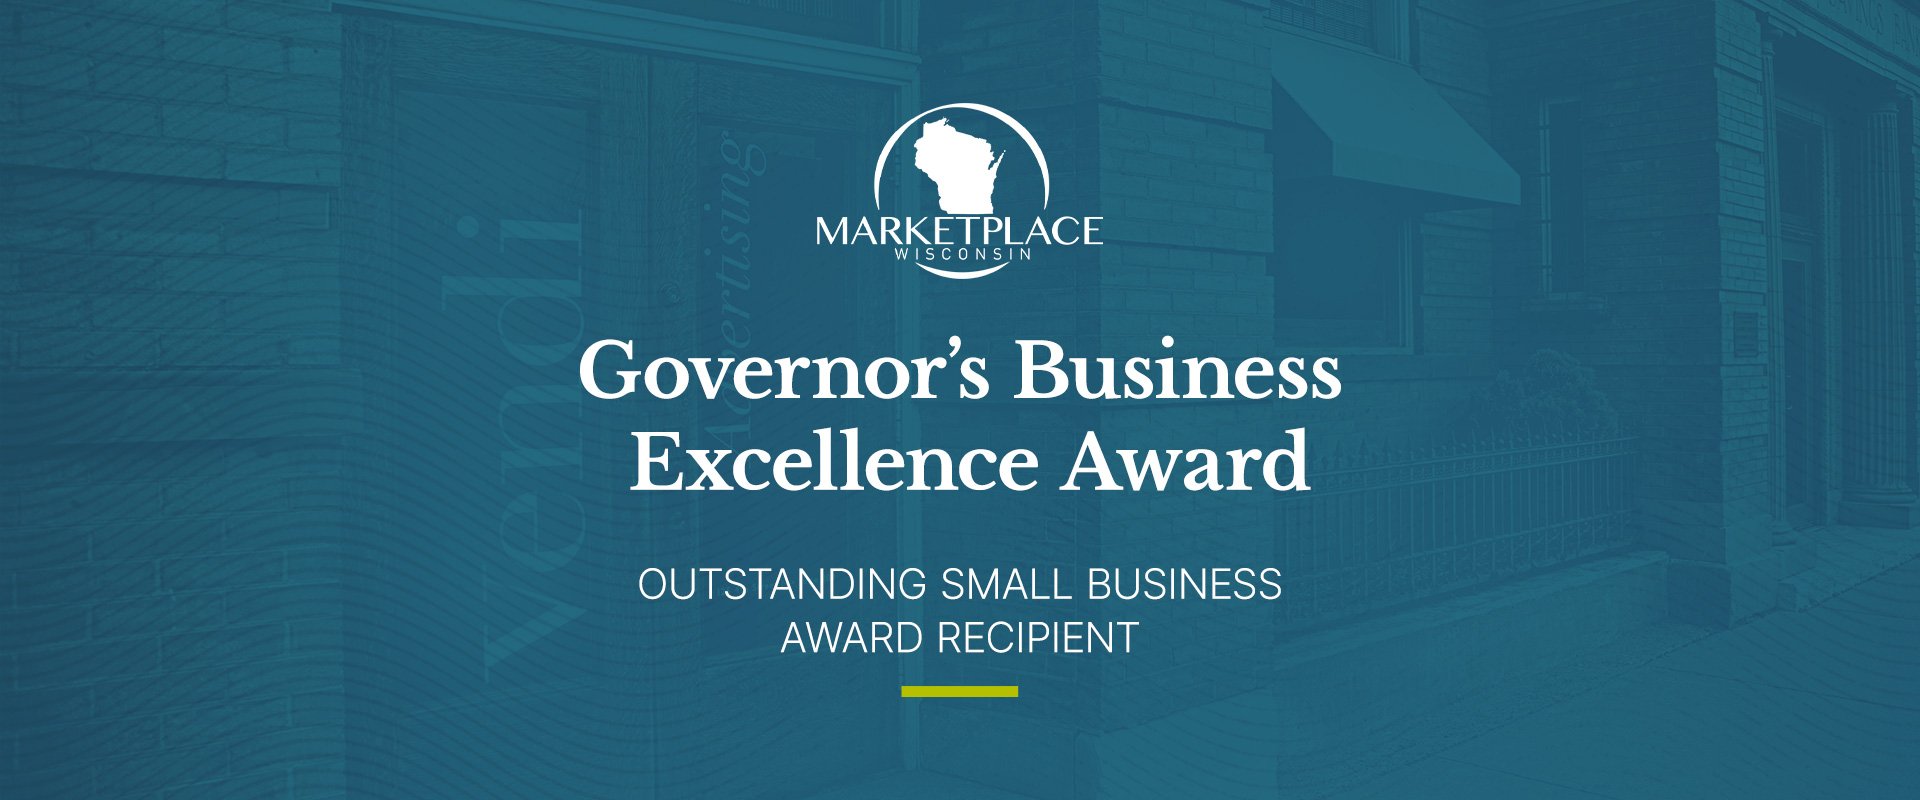 Governor's Business Award graphic